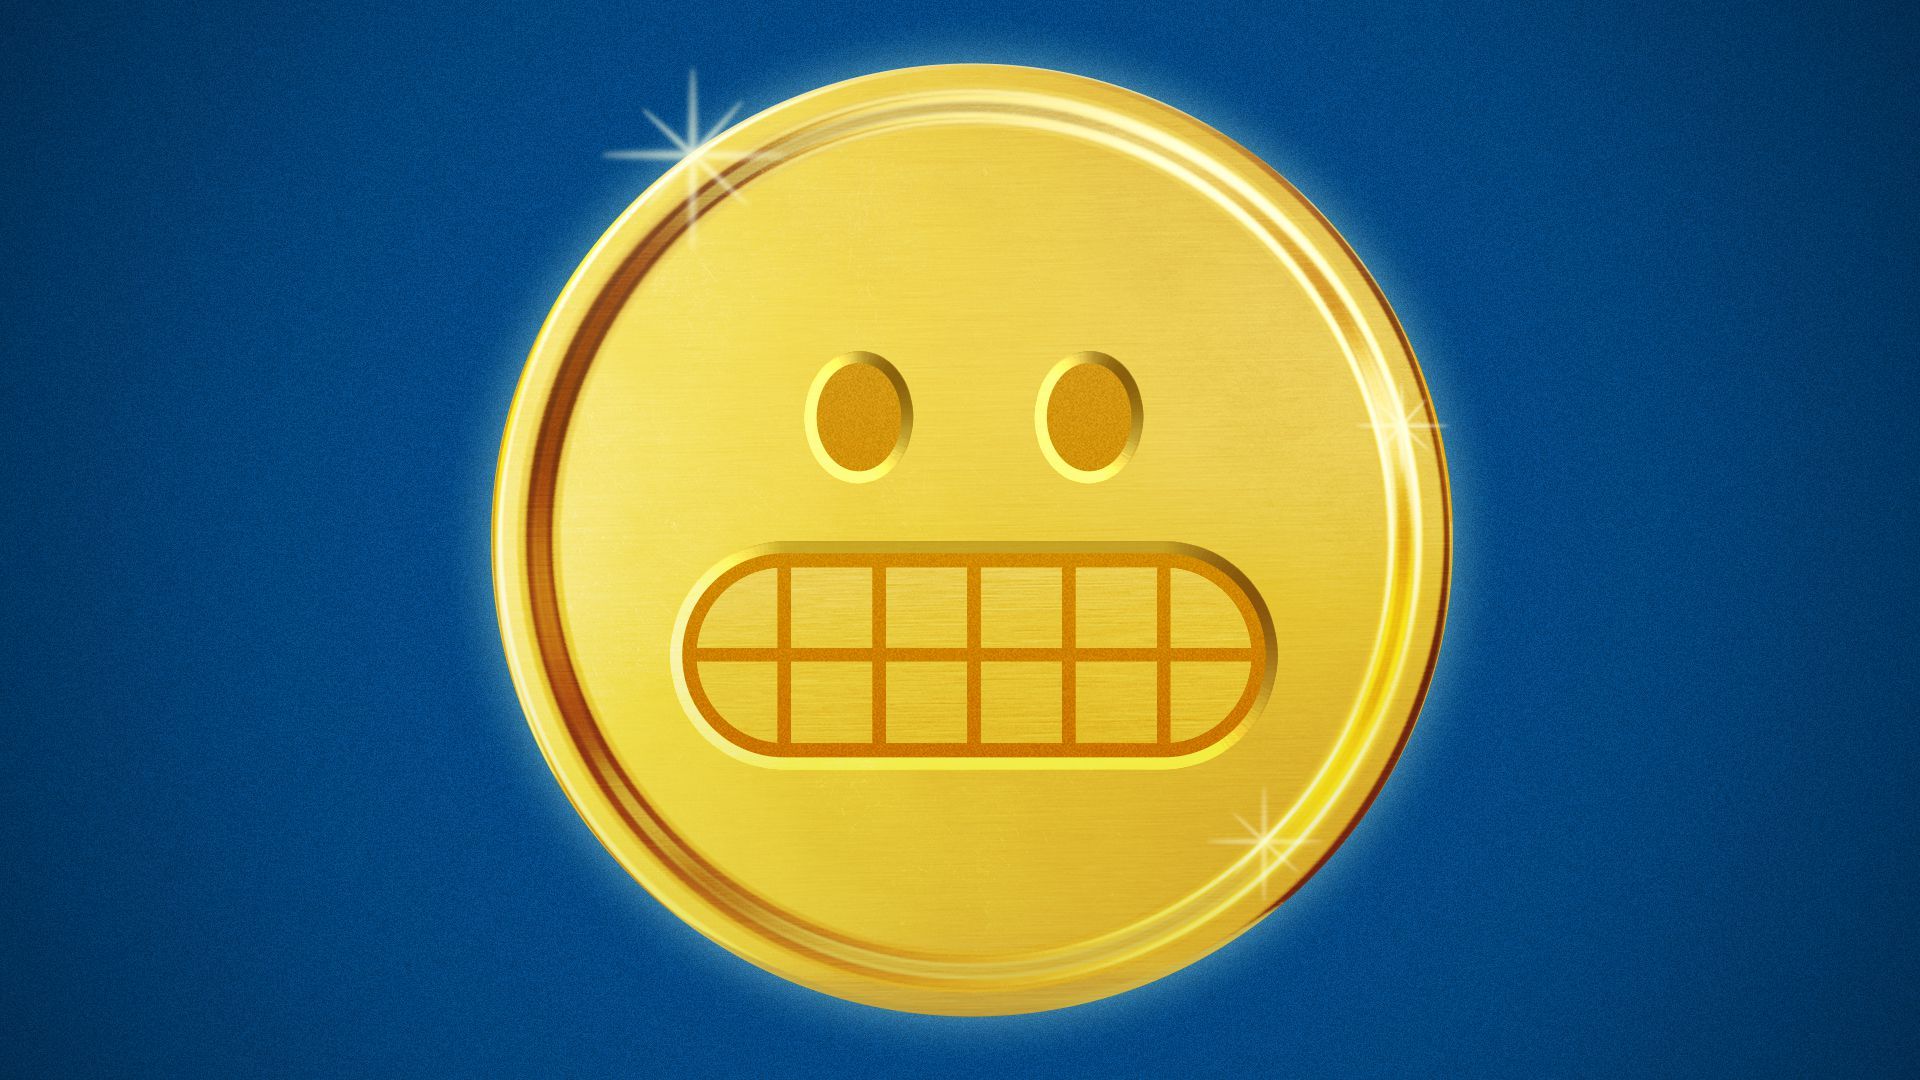 Illustration of the grimacing emoji as a gold coin.